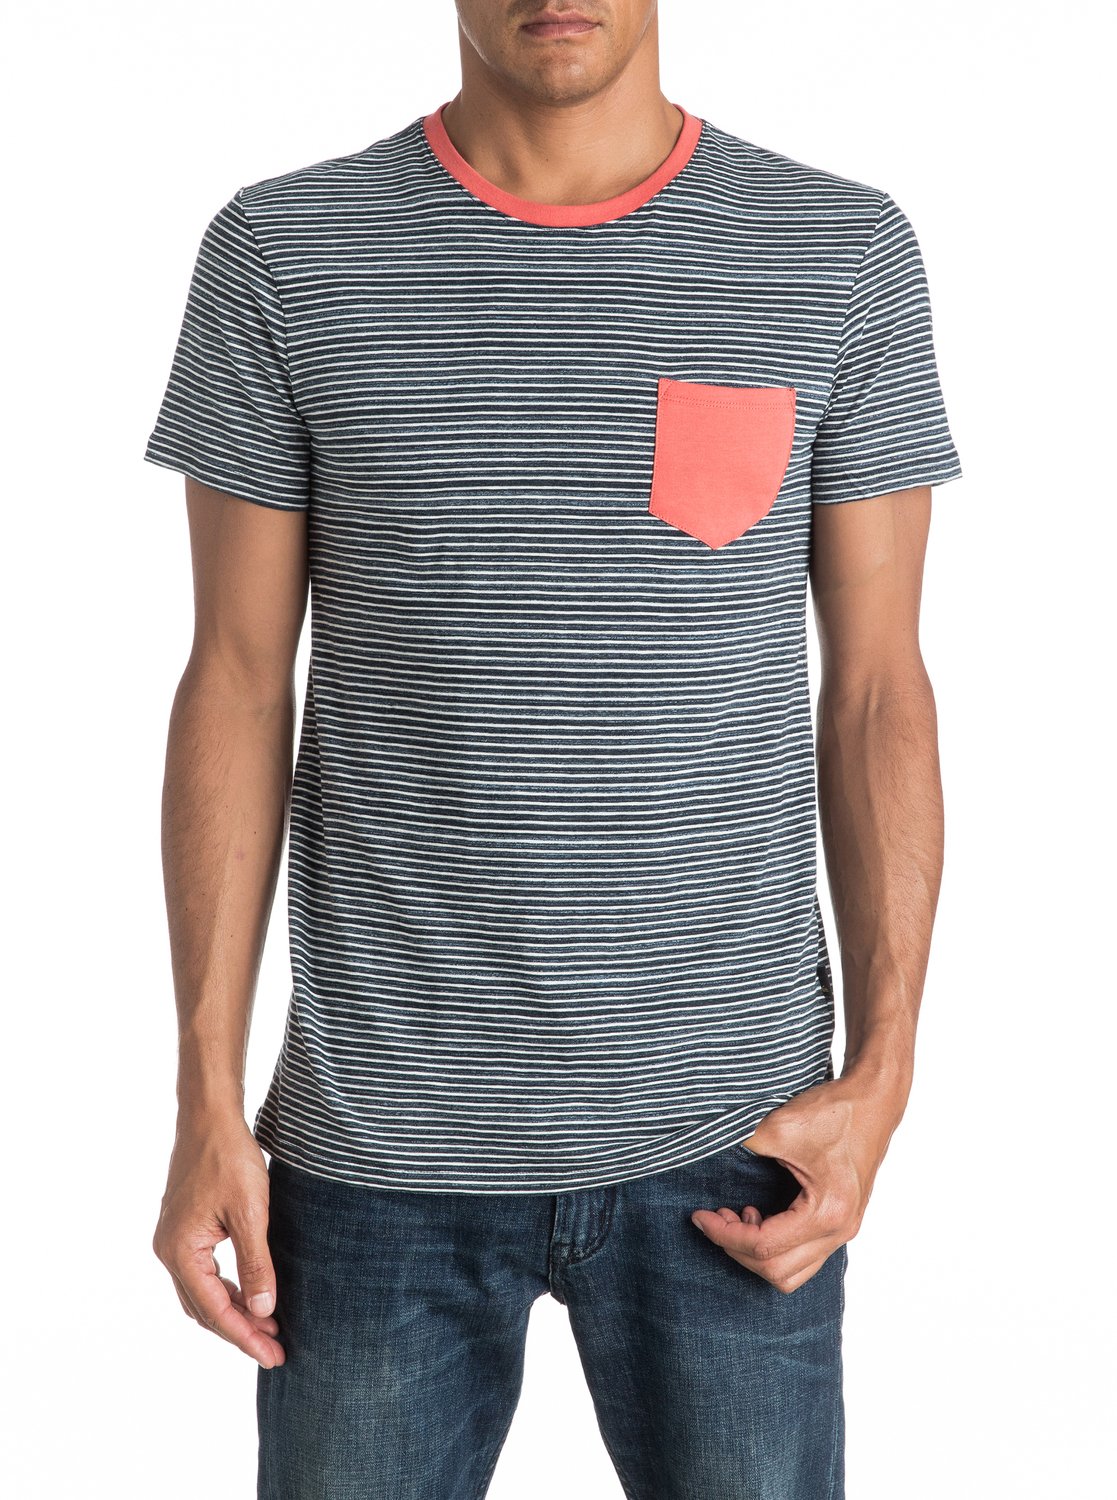 Cape May Lefts - Tee-Shirt a poche pour Homme - Quiksilver